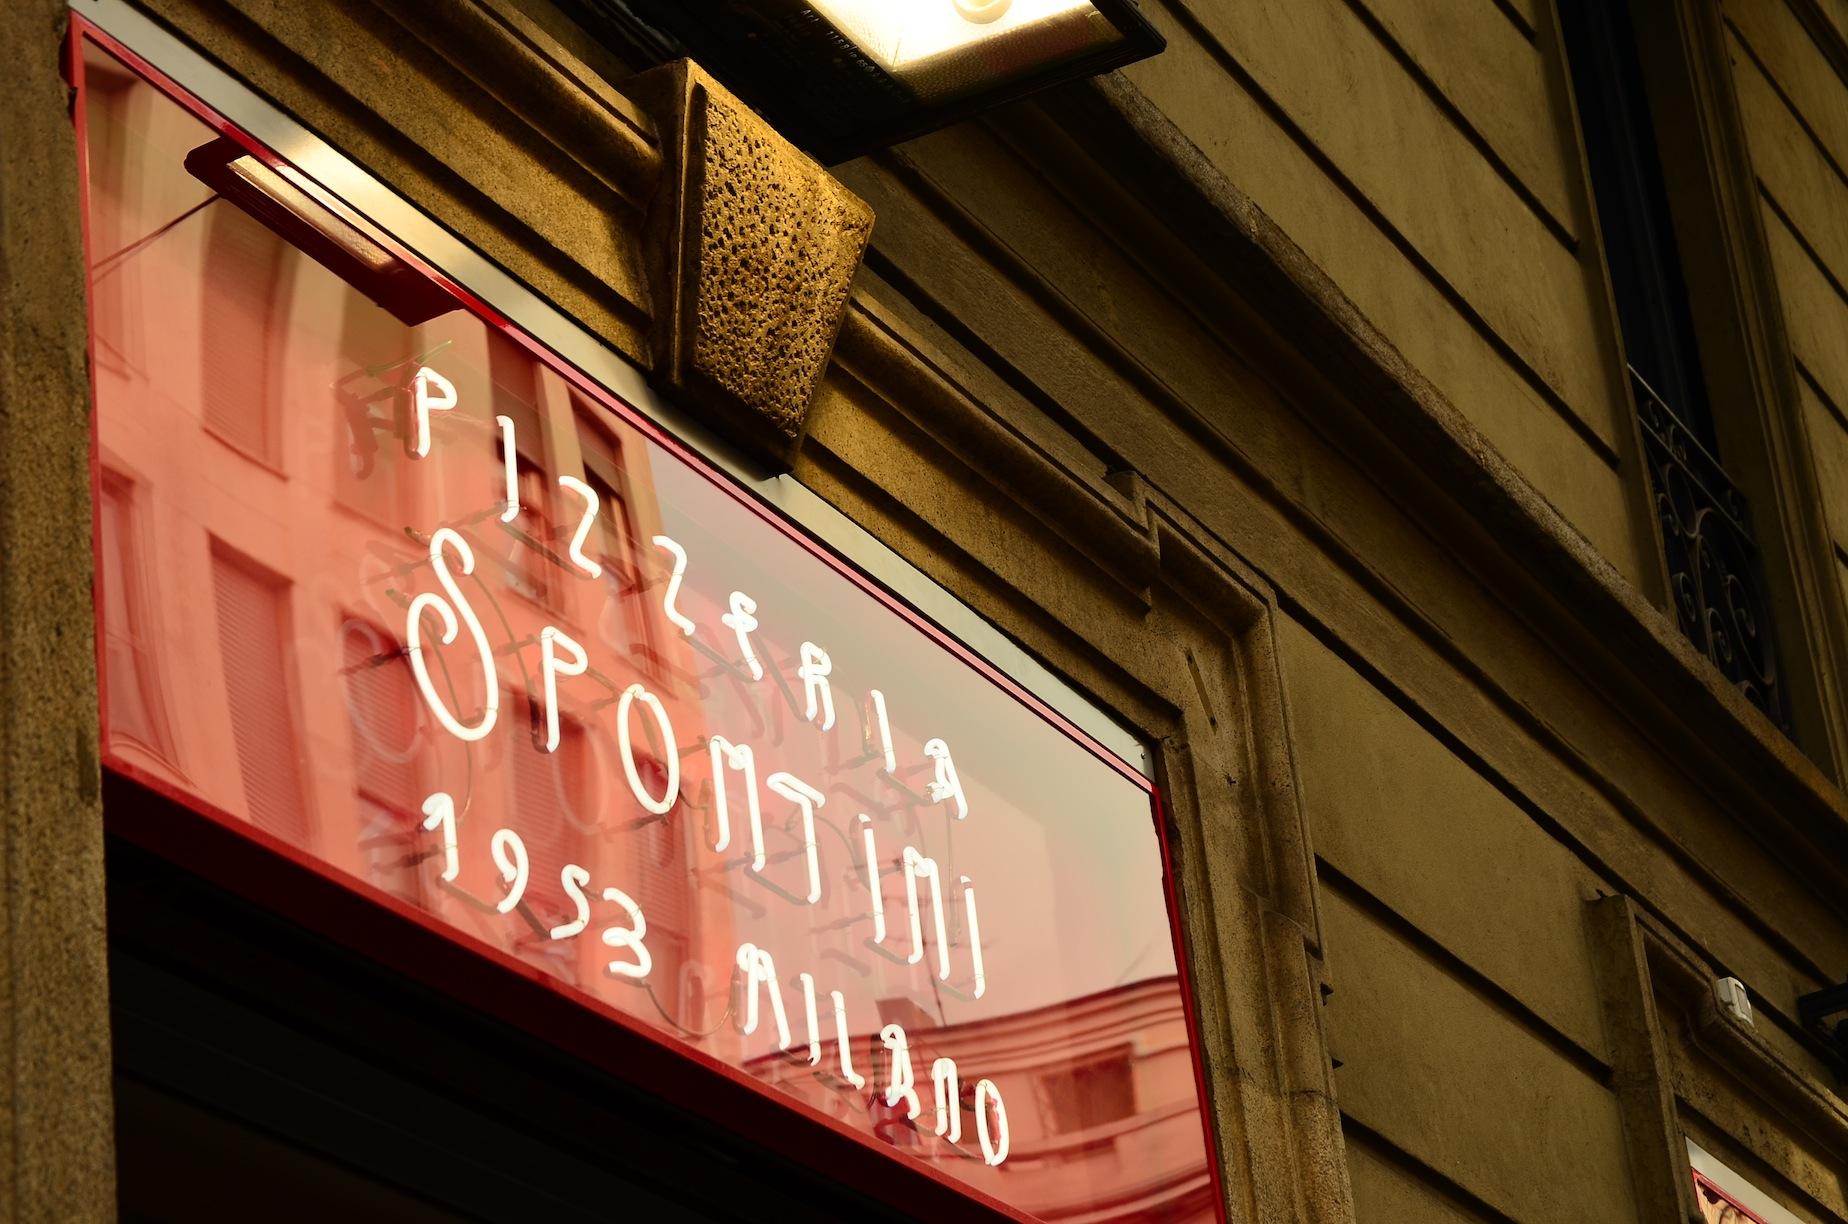 Cover image of this place Pizzeria Spontini